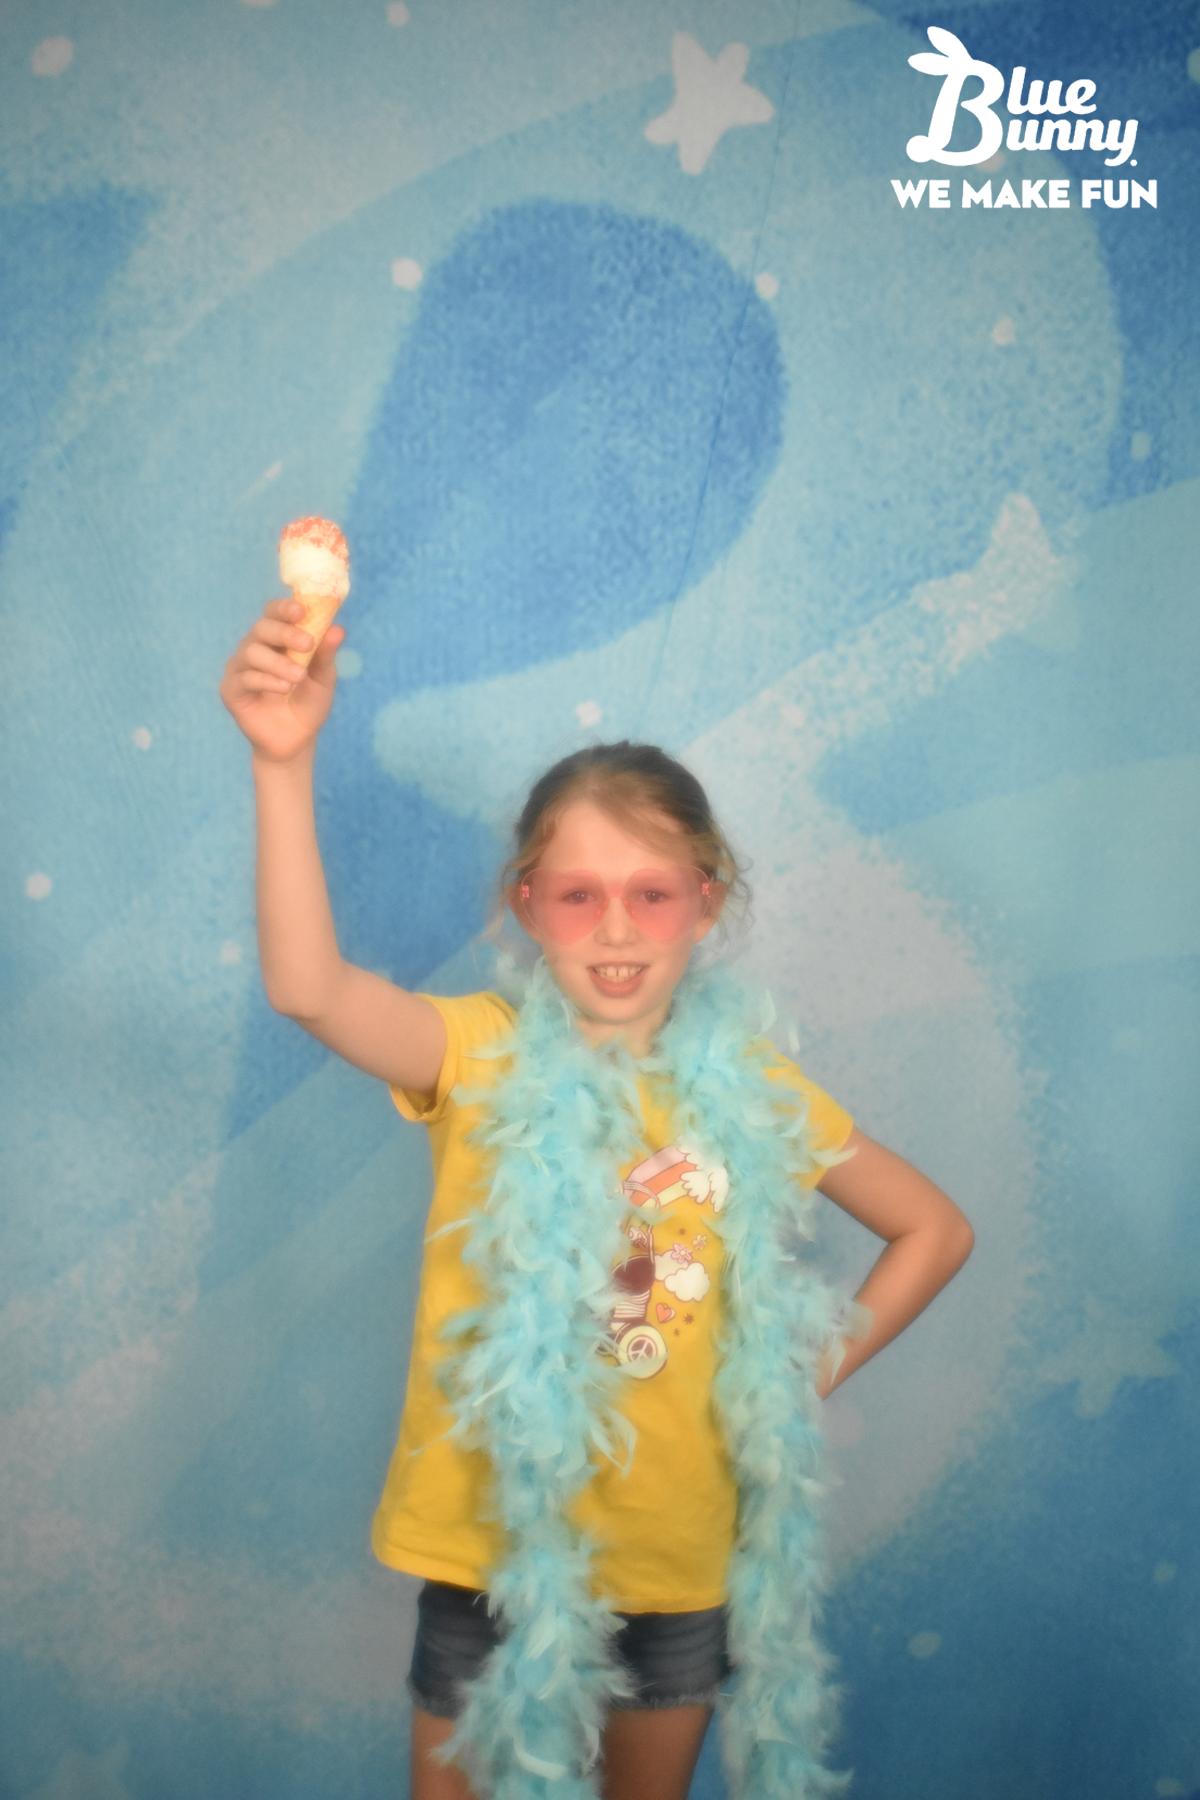 Girl with a blue boa holding up a mini swirl with pink heart glasses